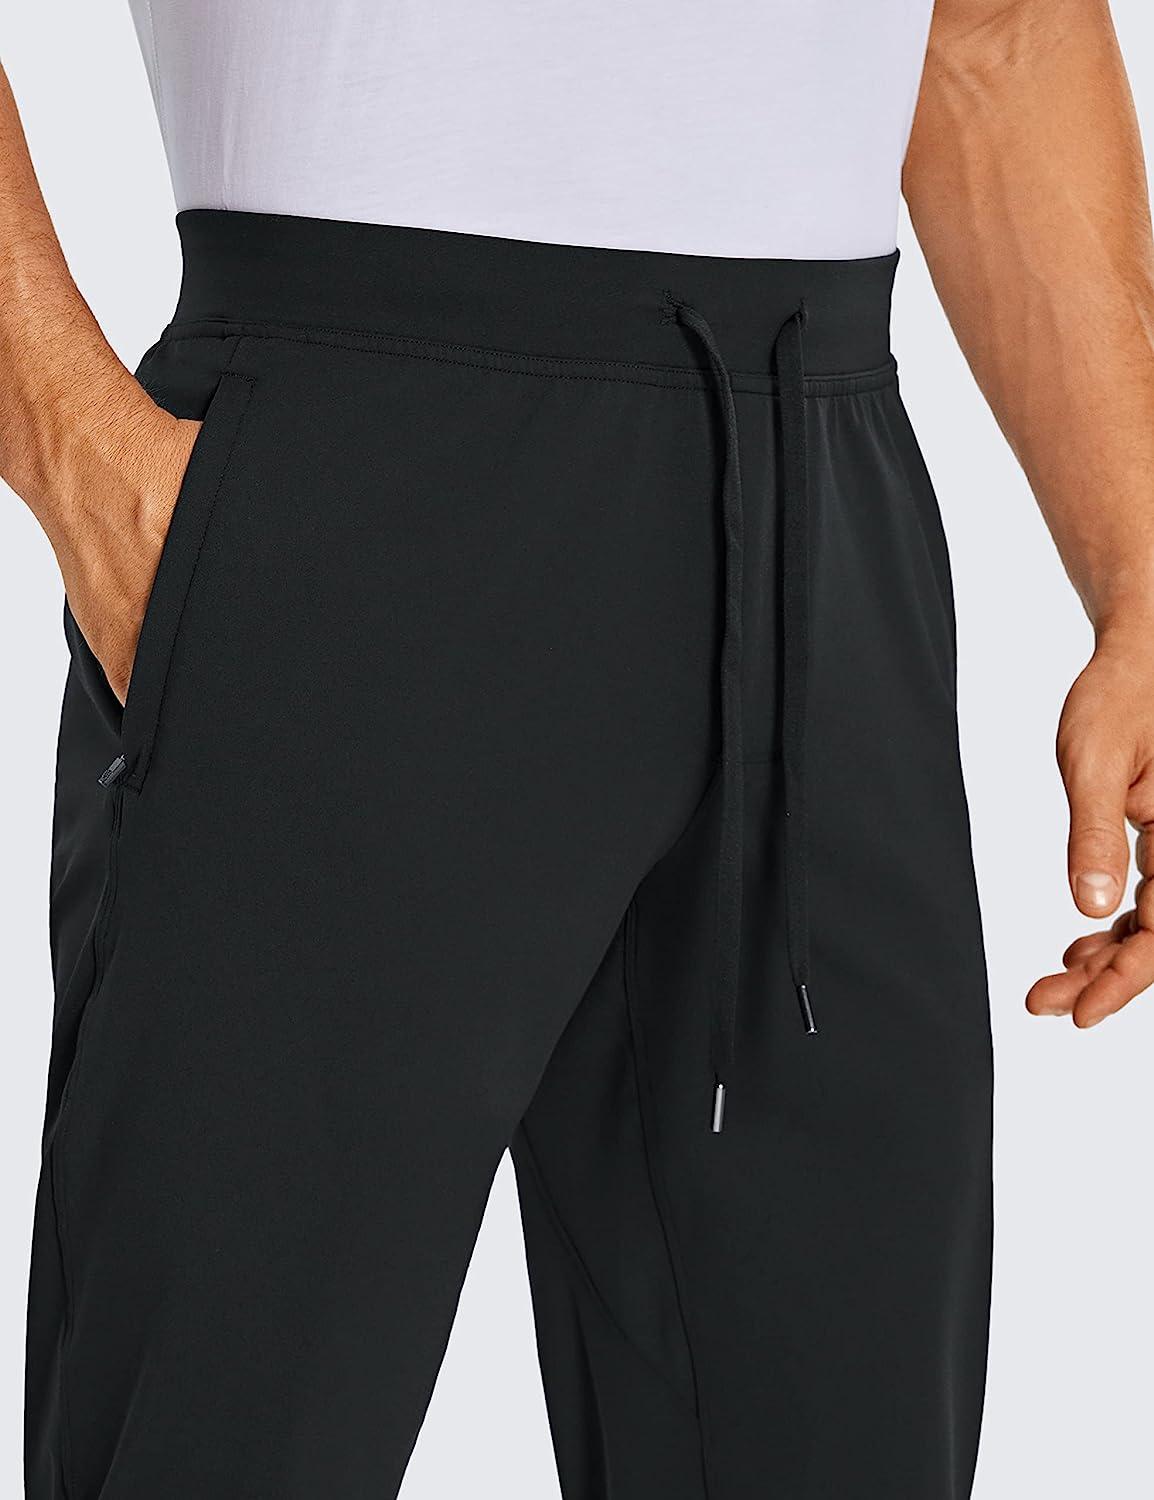 CRZ YOGA On the Travel Men's 30 Inches Golf Joggers Ankle Zipper